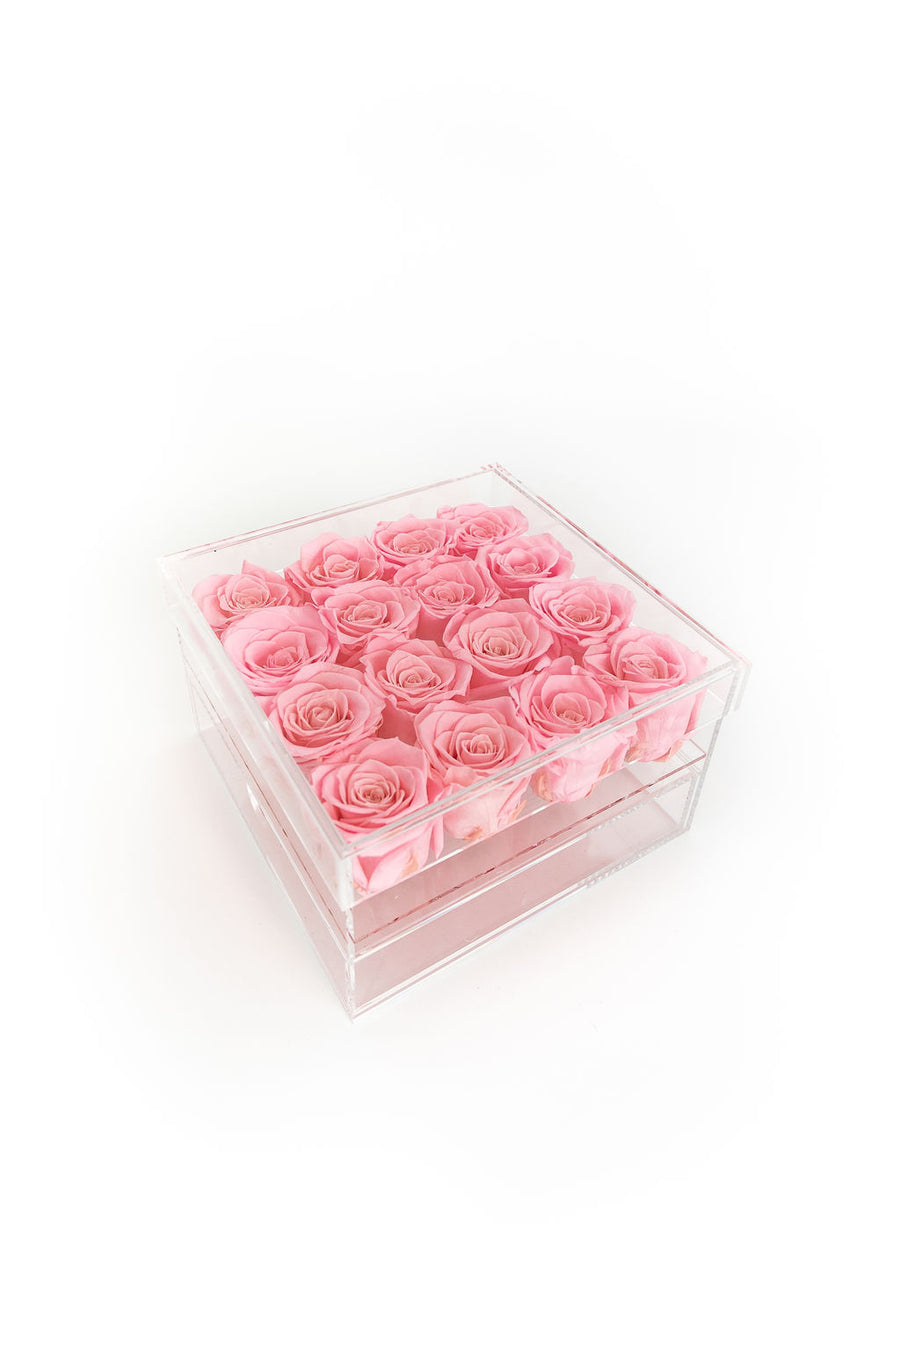 PINK 16 PRESERVED ROSES